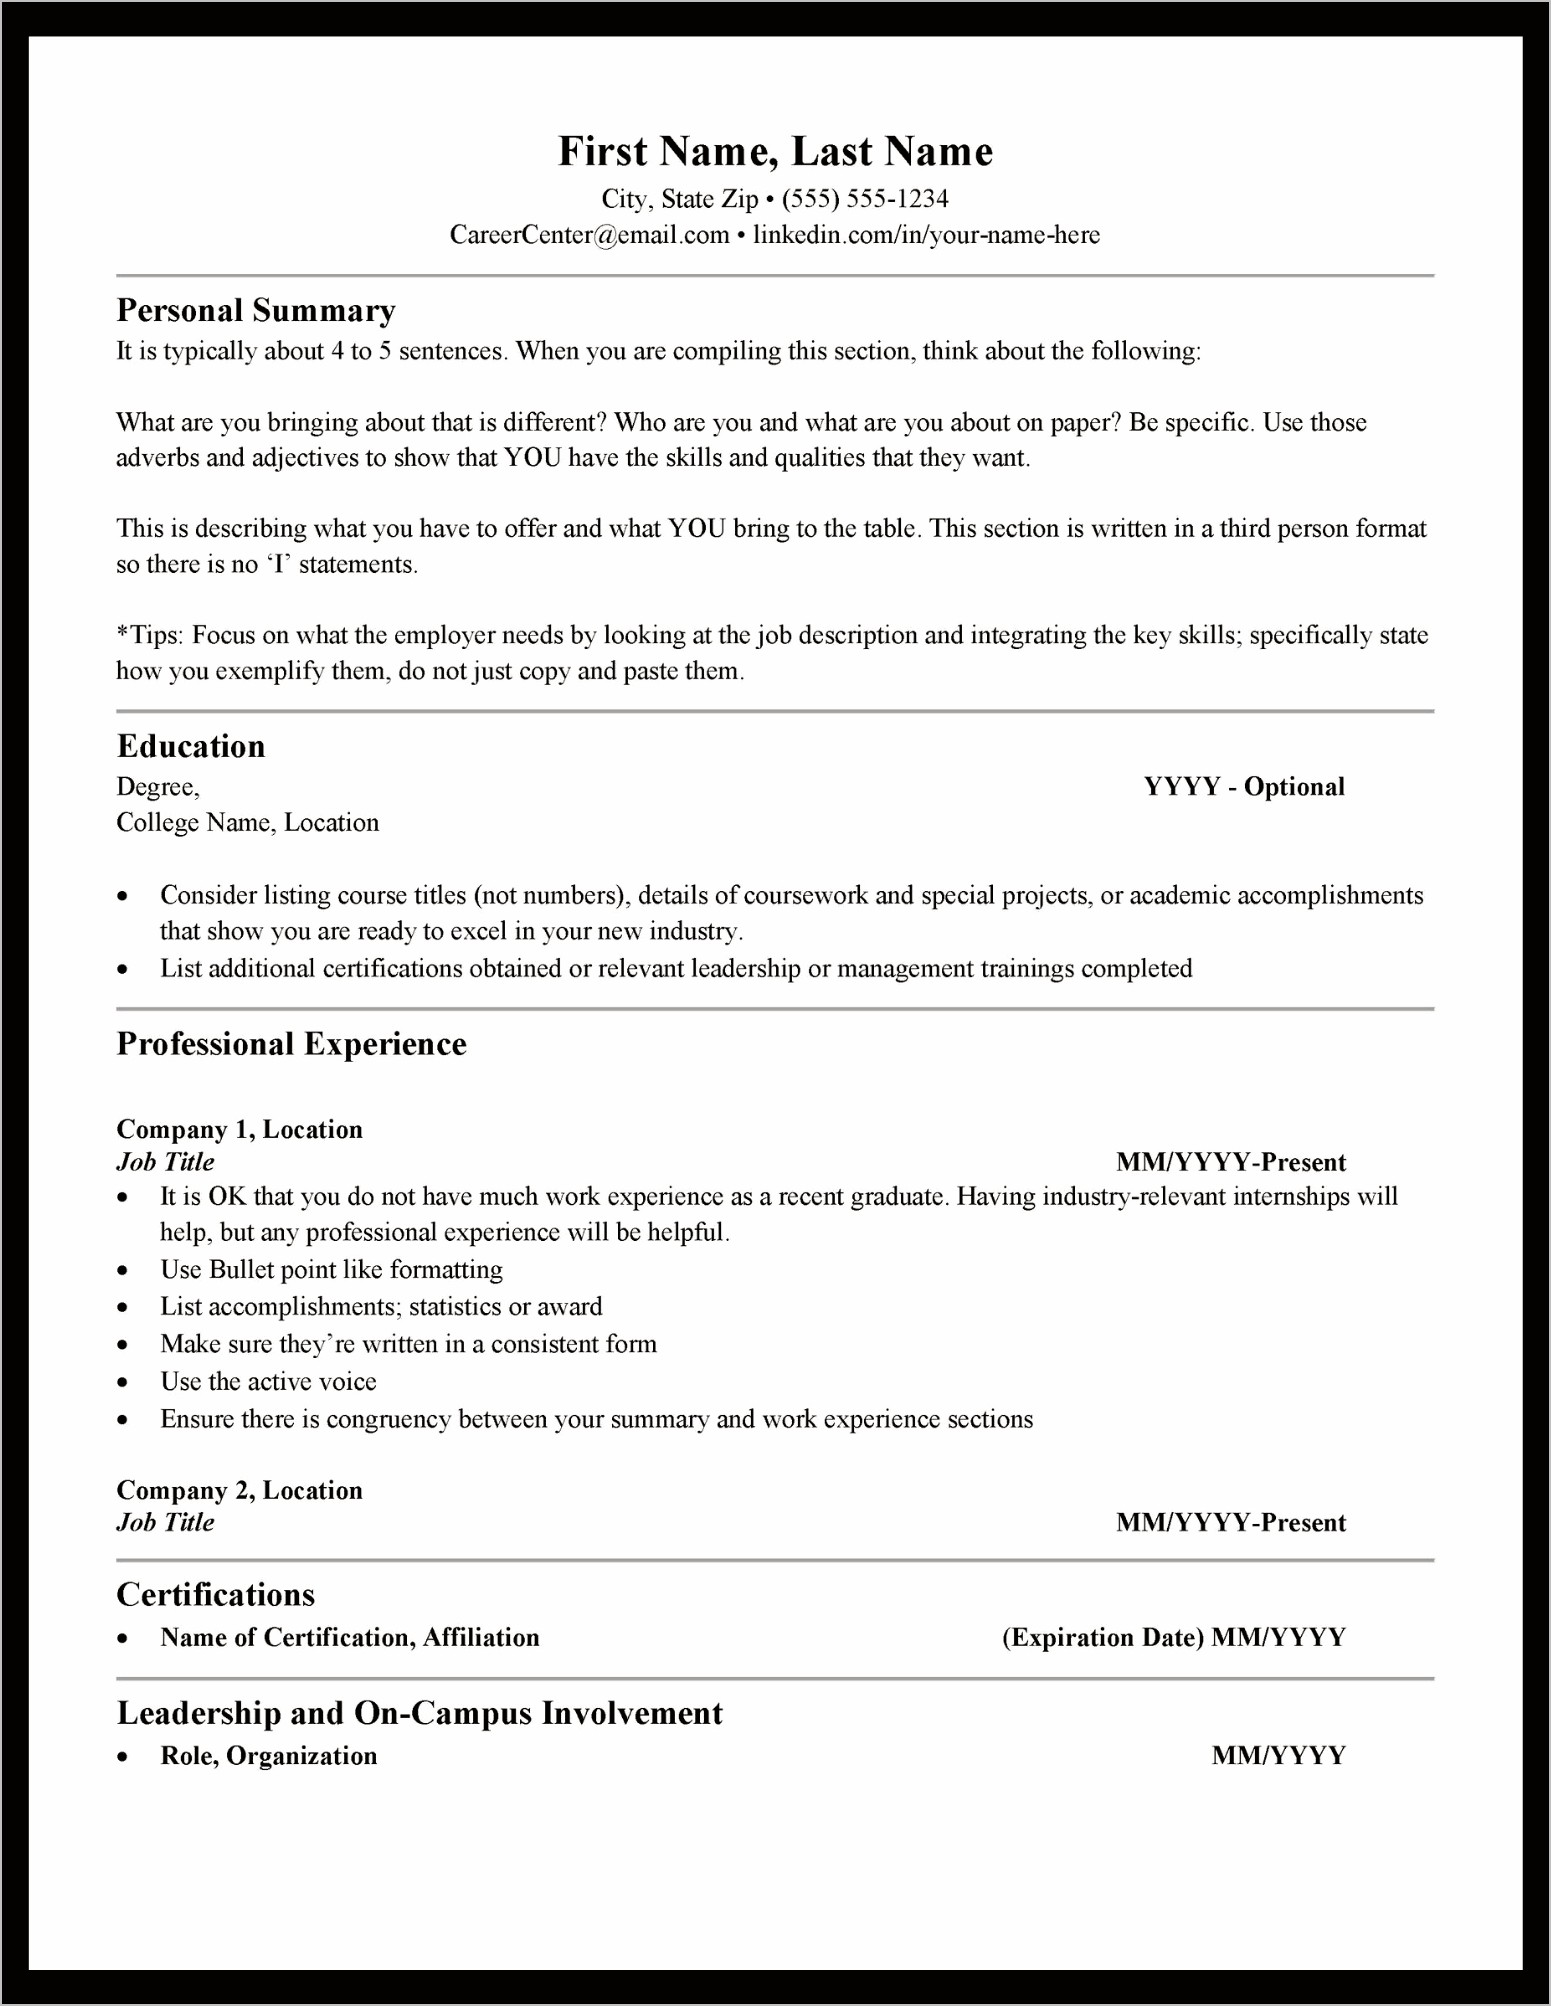 Resume For A College Graduate Template